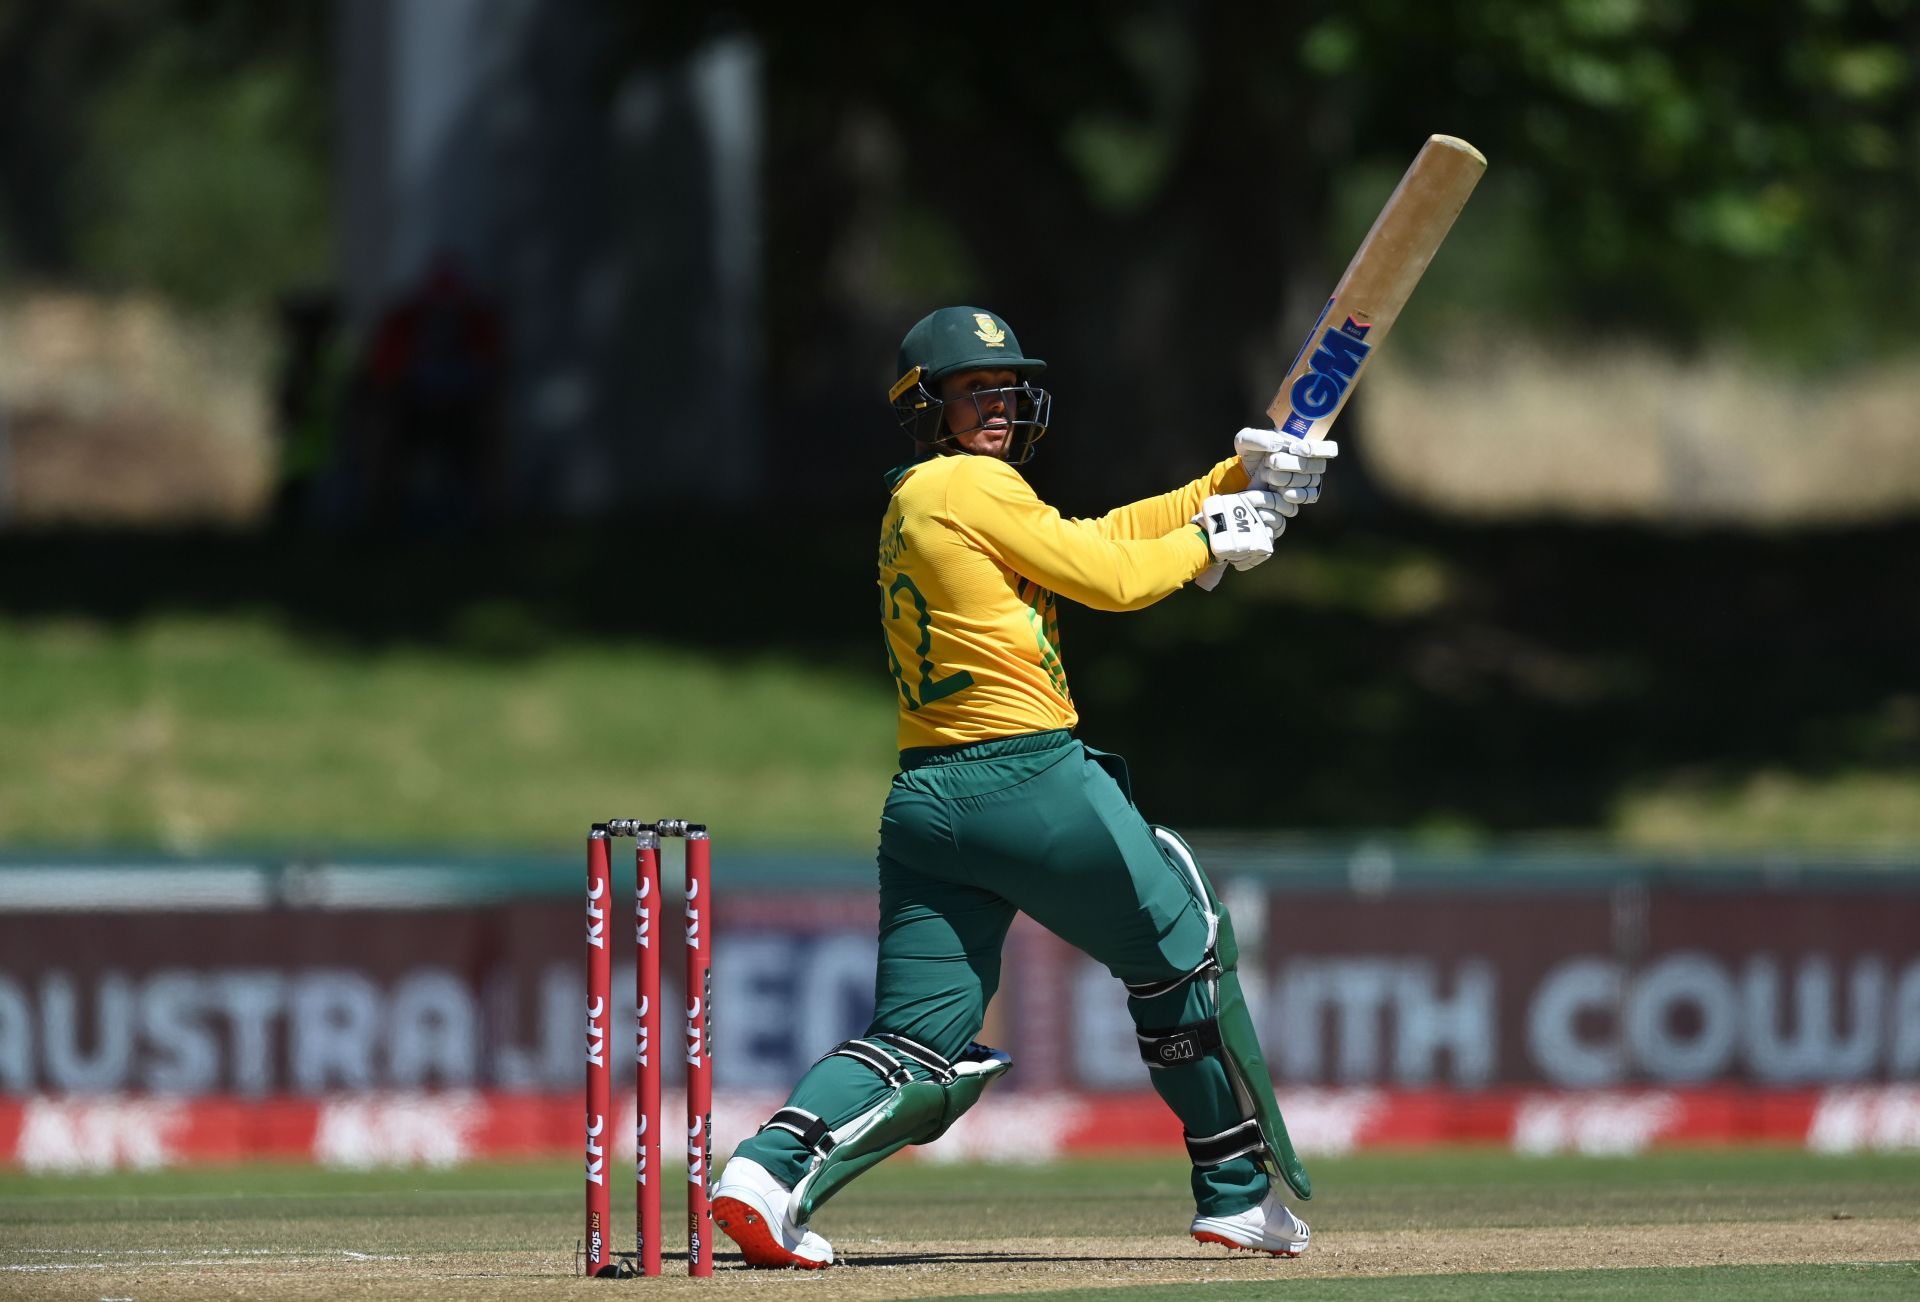 De Kock can make an impact at T20 World Cup with his experience